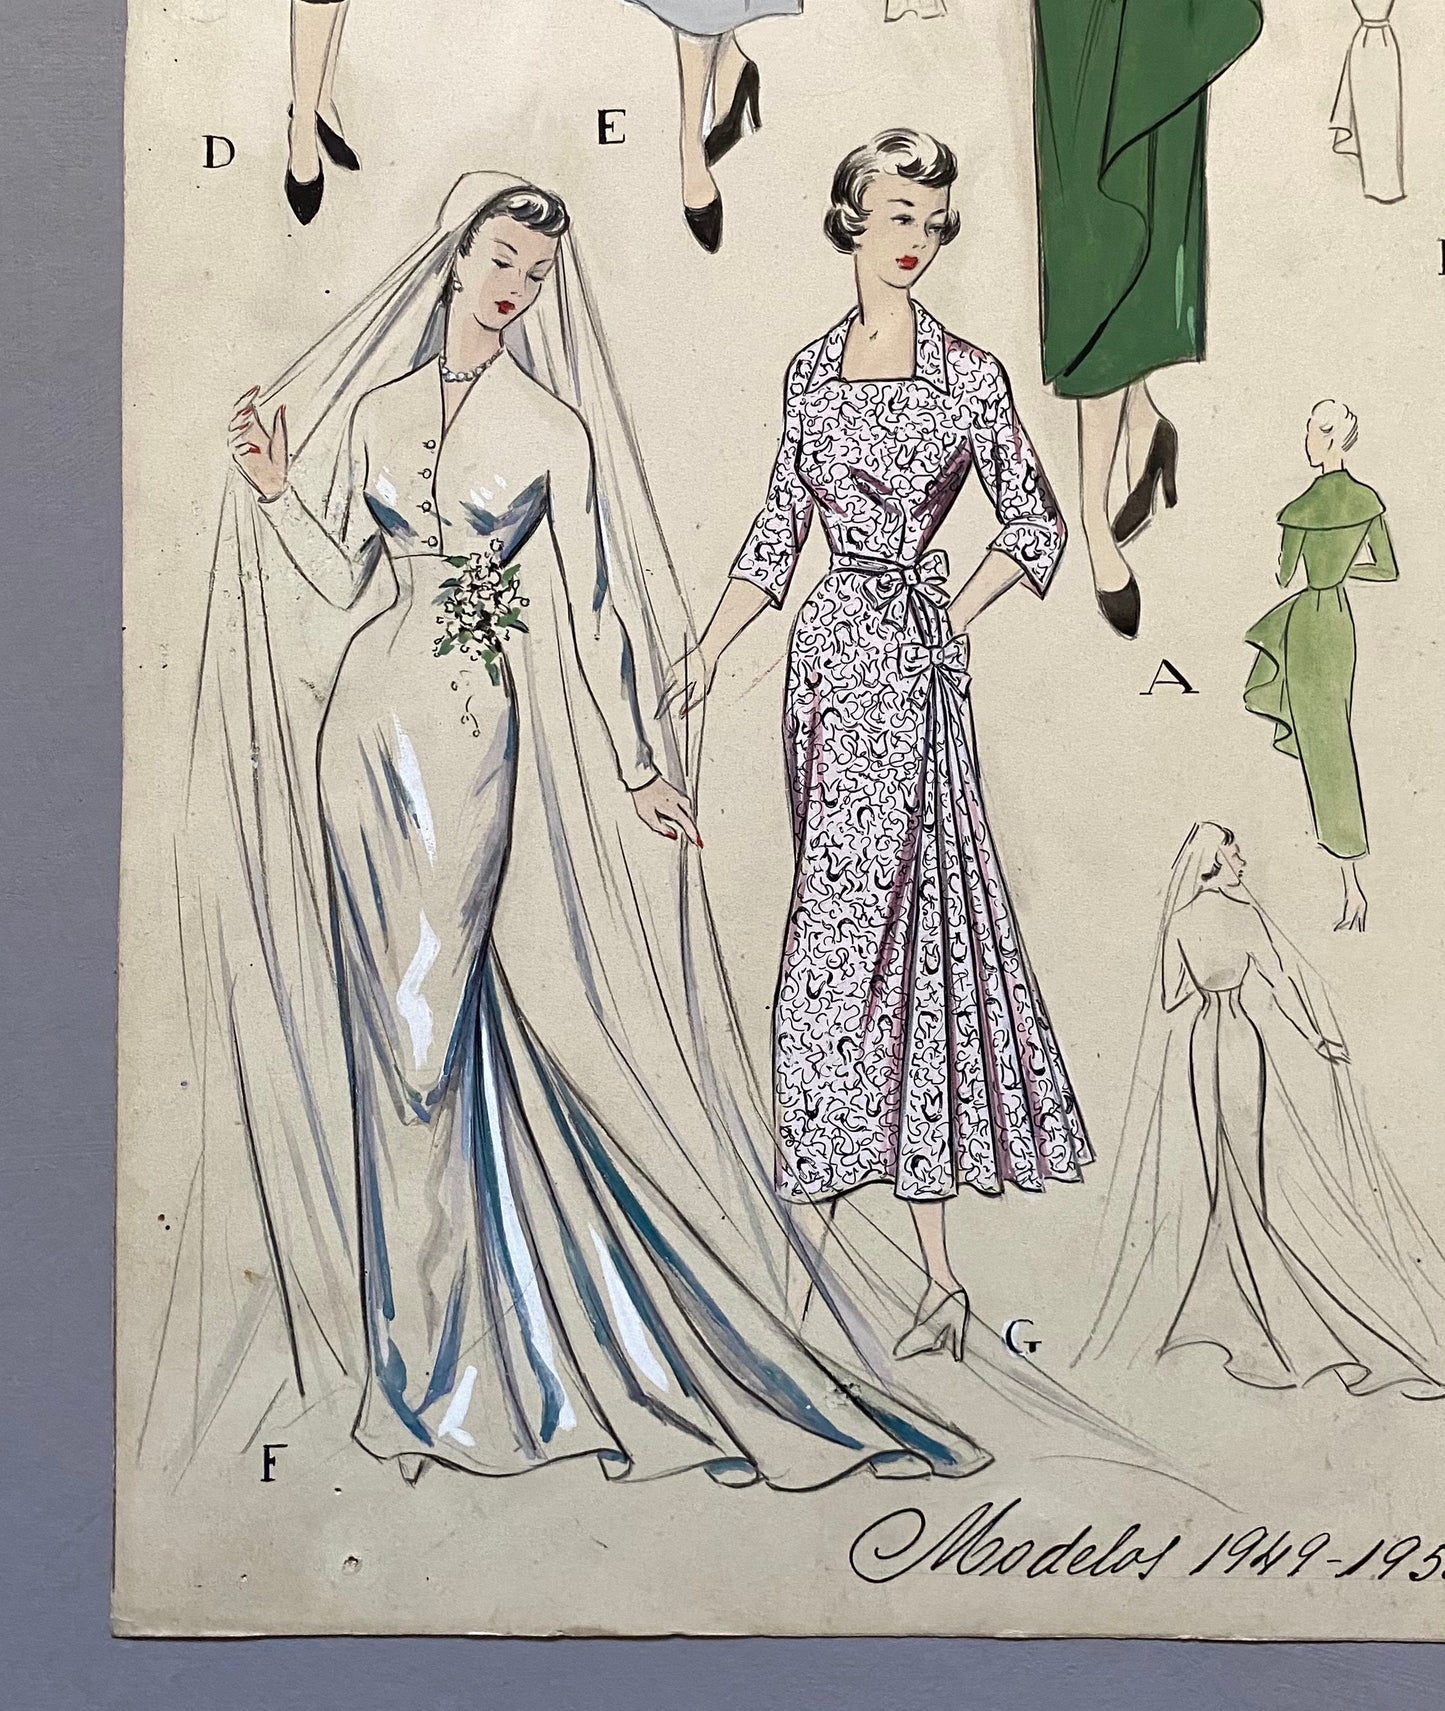 A Large Hand Drawn and Hand Painted Fashion Illustration. From Barcelona, Spain. 1949 - 1950. Size: 51 x 38 cms.